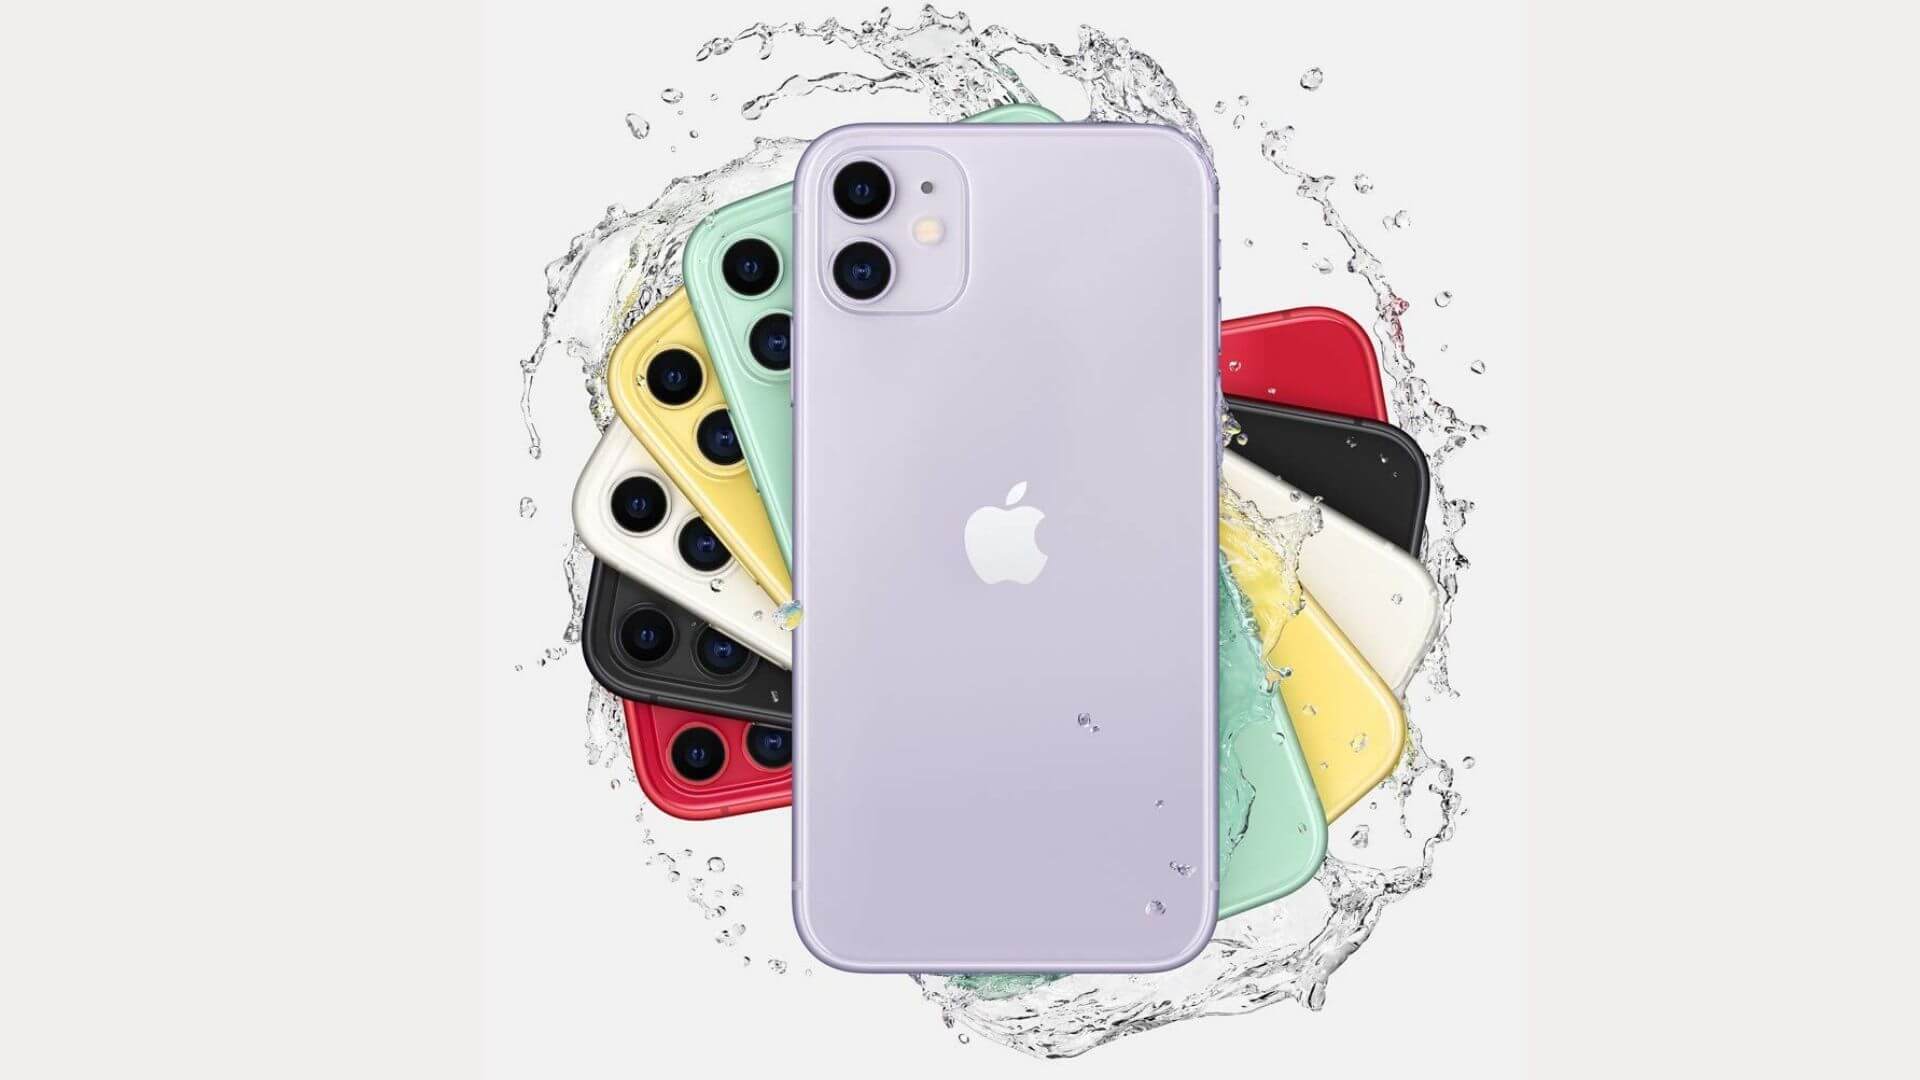 Design and colors of iPhone 11